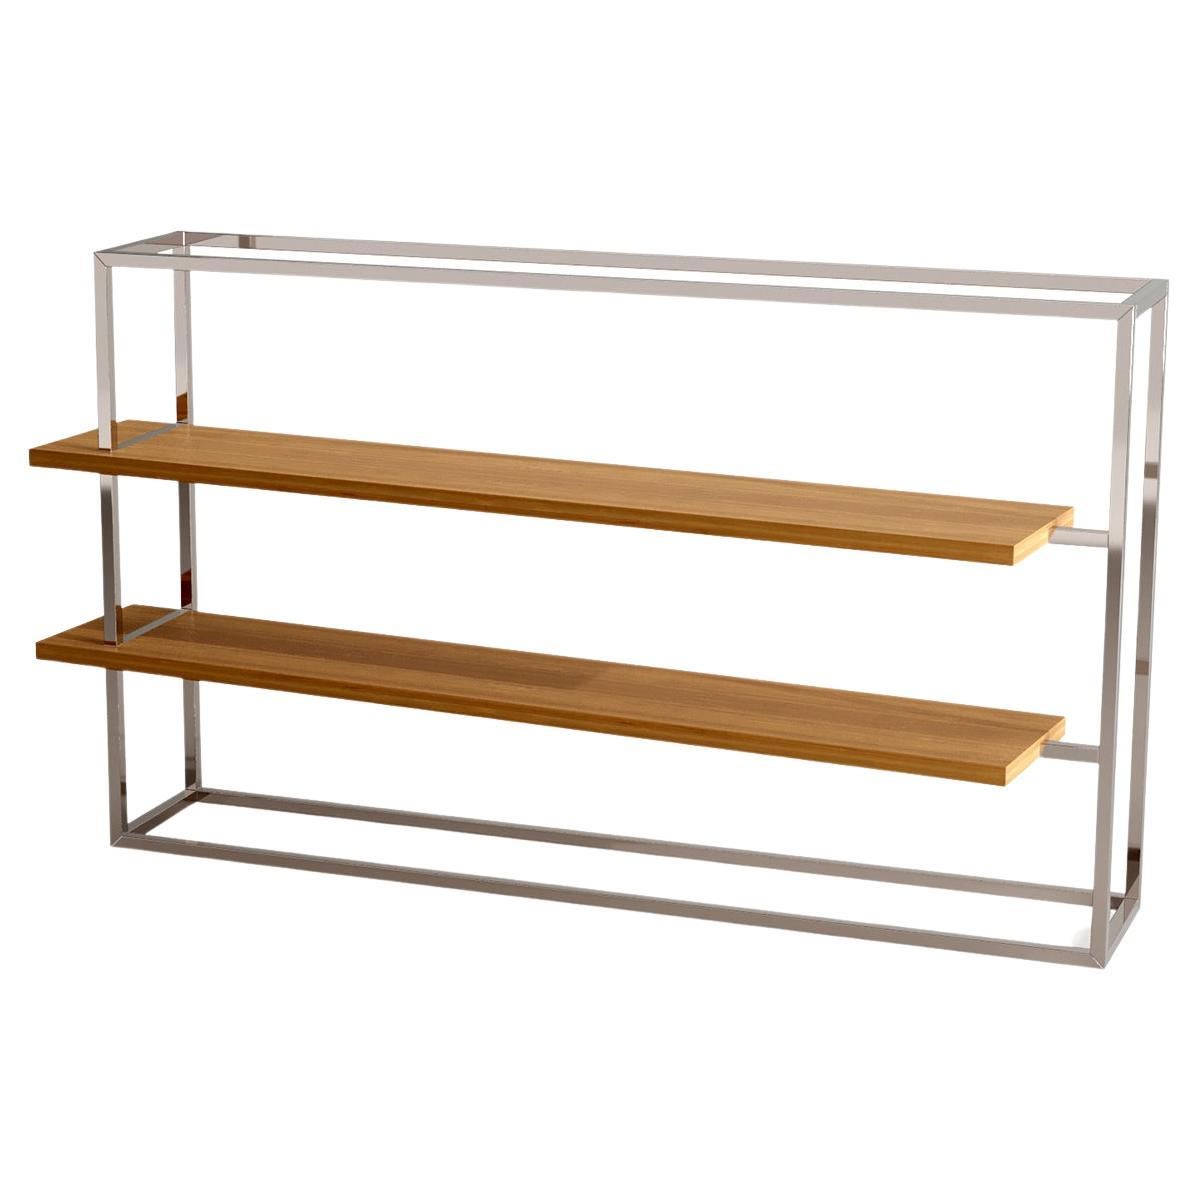 Modern Minimalist Bookcase with Shelves Oak Wood Brushed Stainless Steel